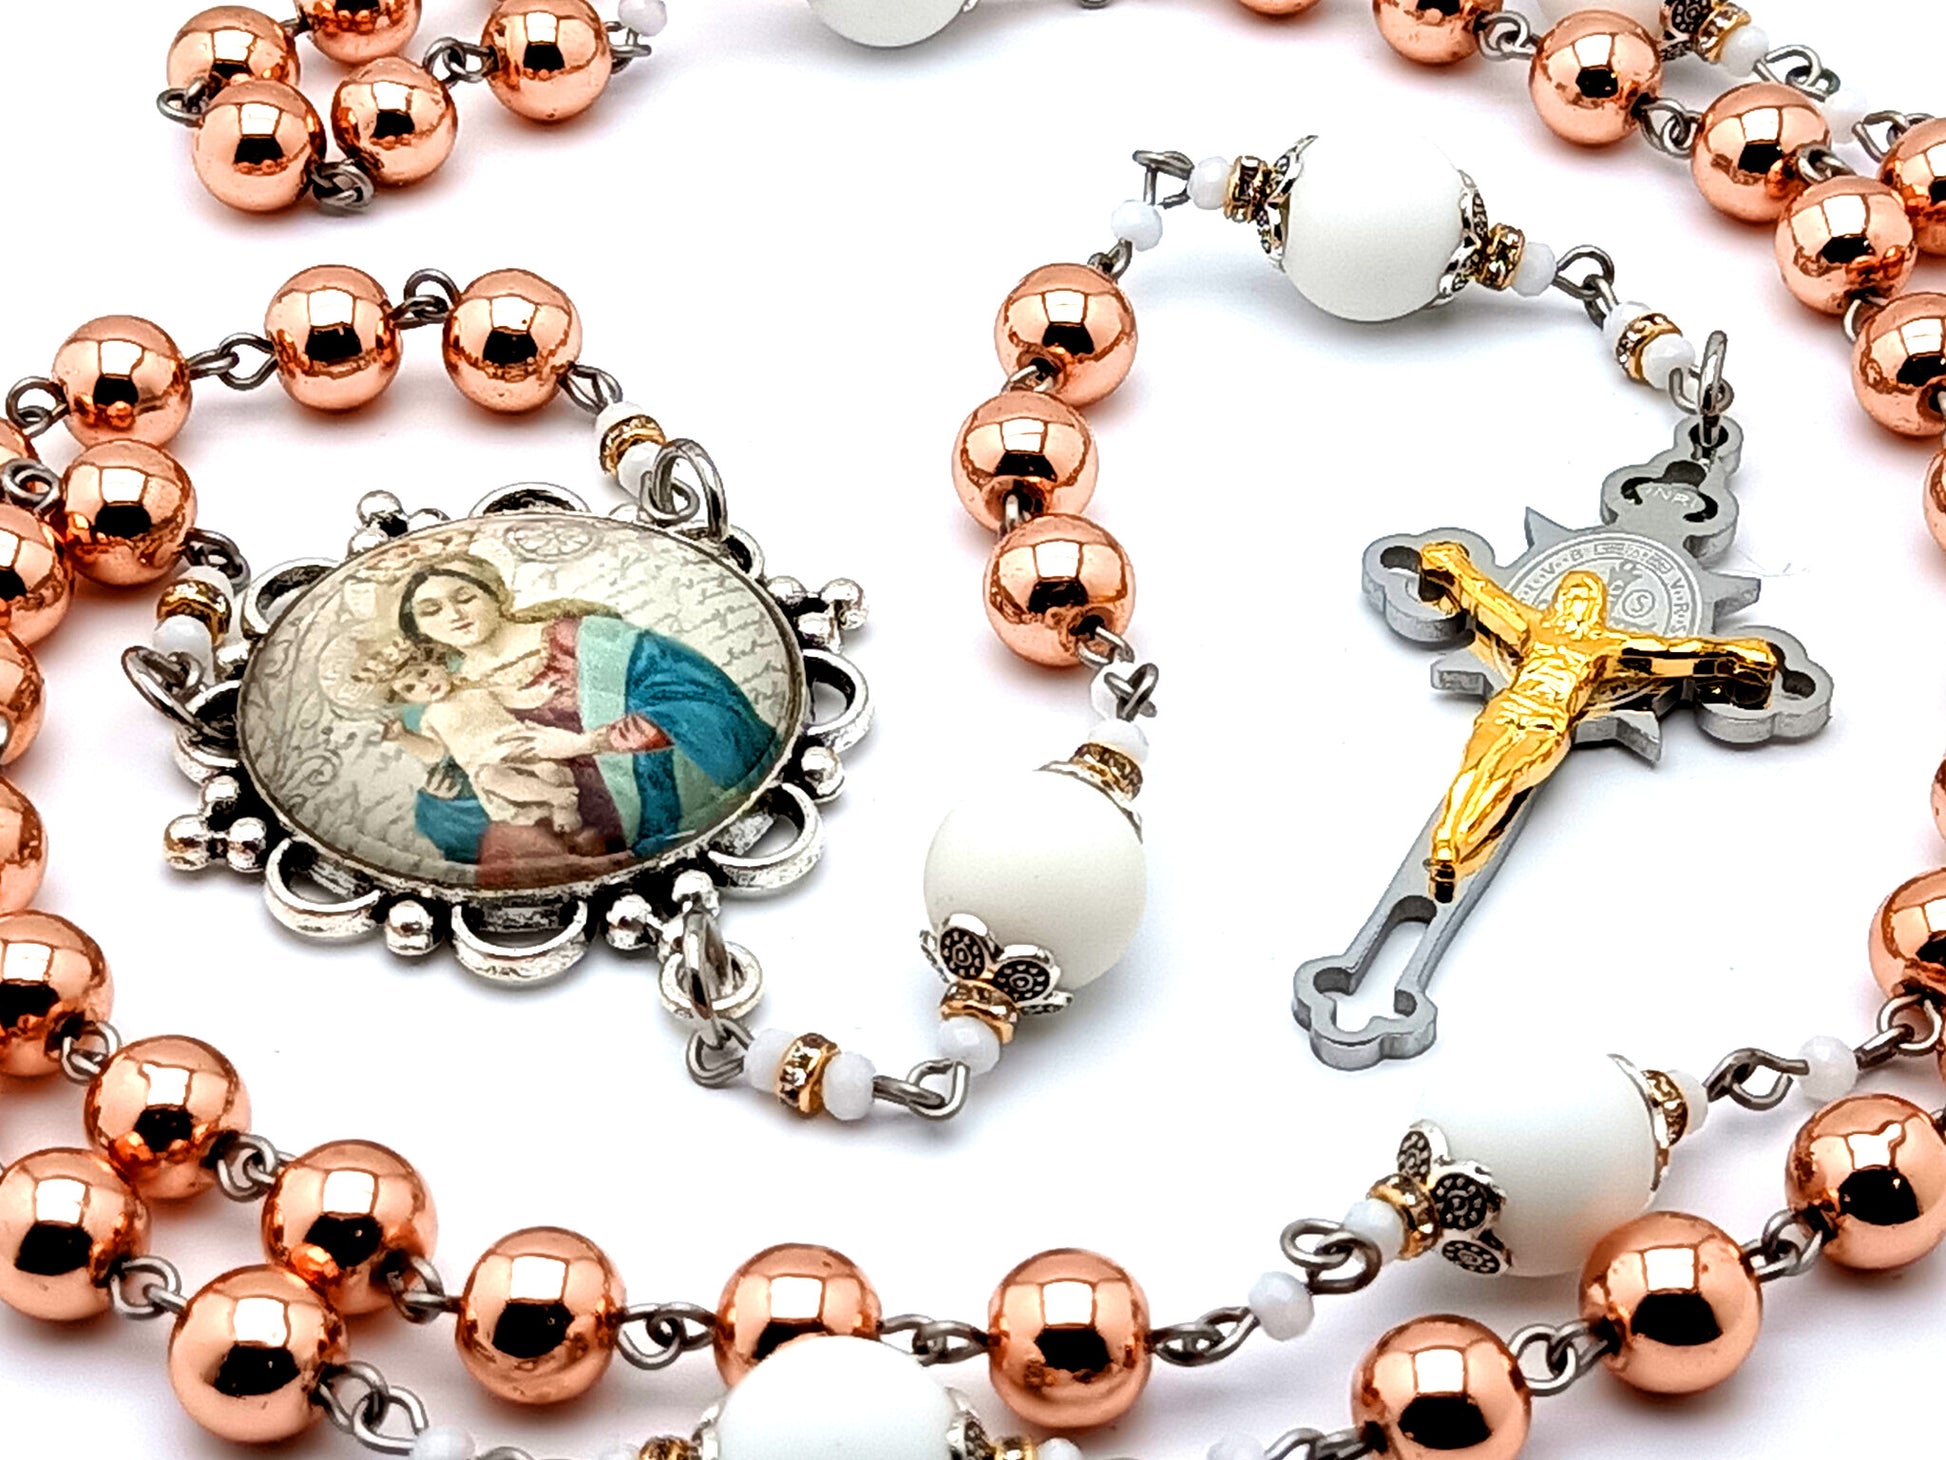 Madonna and Child Jesus unique rosary beads with rose gold hematite and alabaster gemstone beads and Saint Benedict stainless steel and gold crucifix.